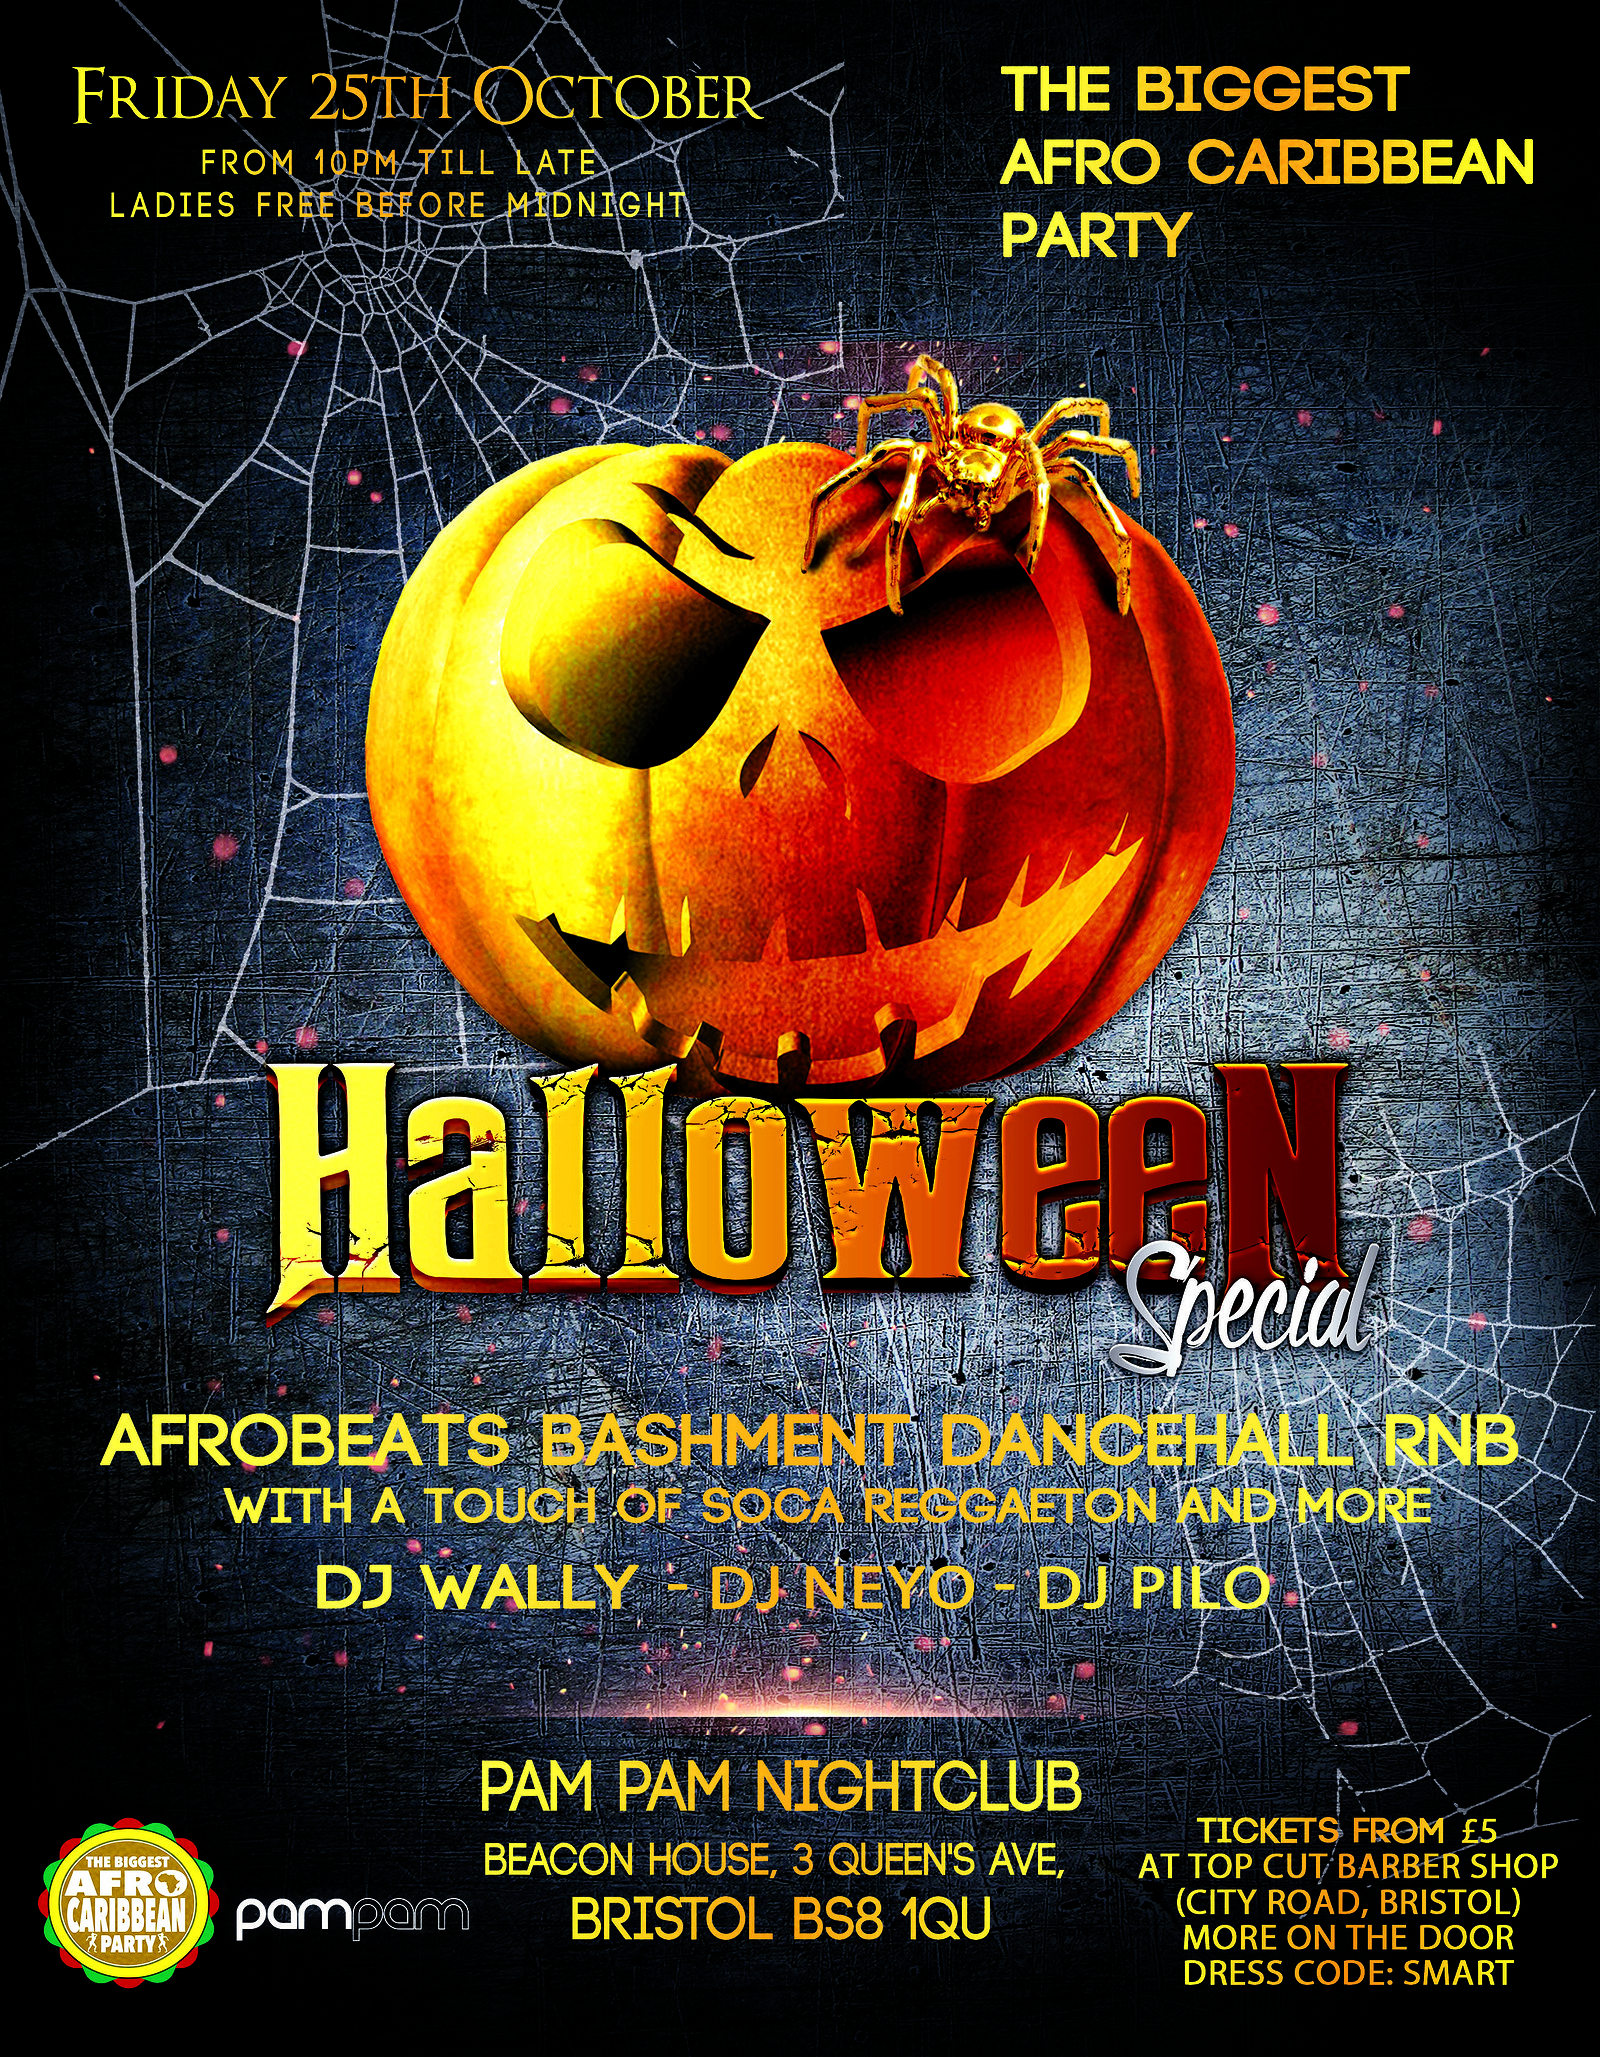 The Biggest Afrocaribbean Halloween Party at Pam Pam